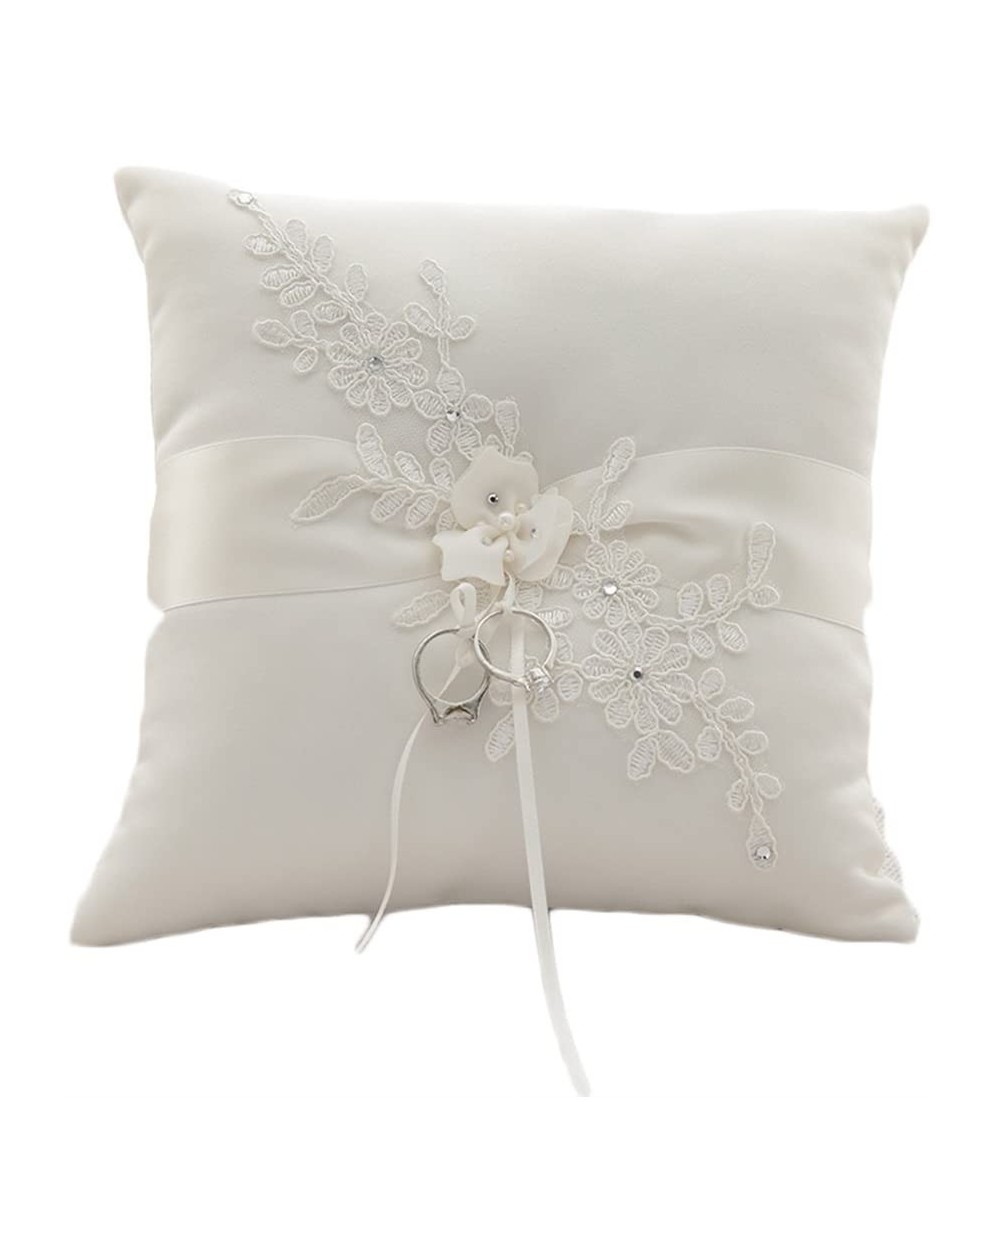 Ceremony Supplies Lace Pearl Embroided Satin Flower Wedding Ring Bearer Pillow 7.8 Inch x 7.8 Inch (Ivory Satin) - Ivory Sati...